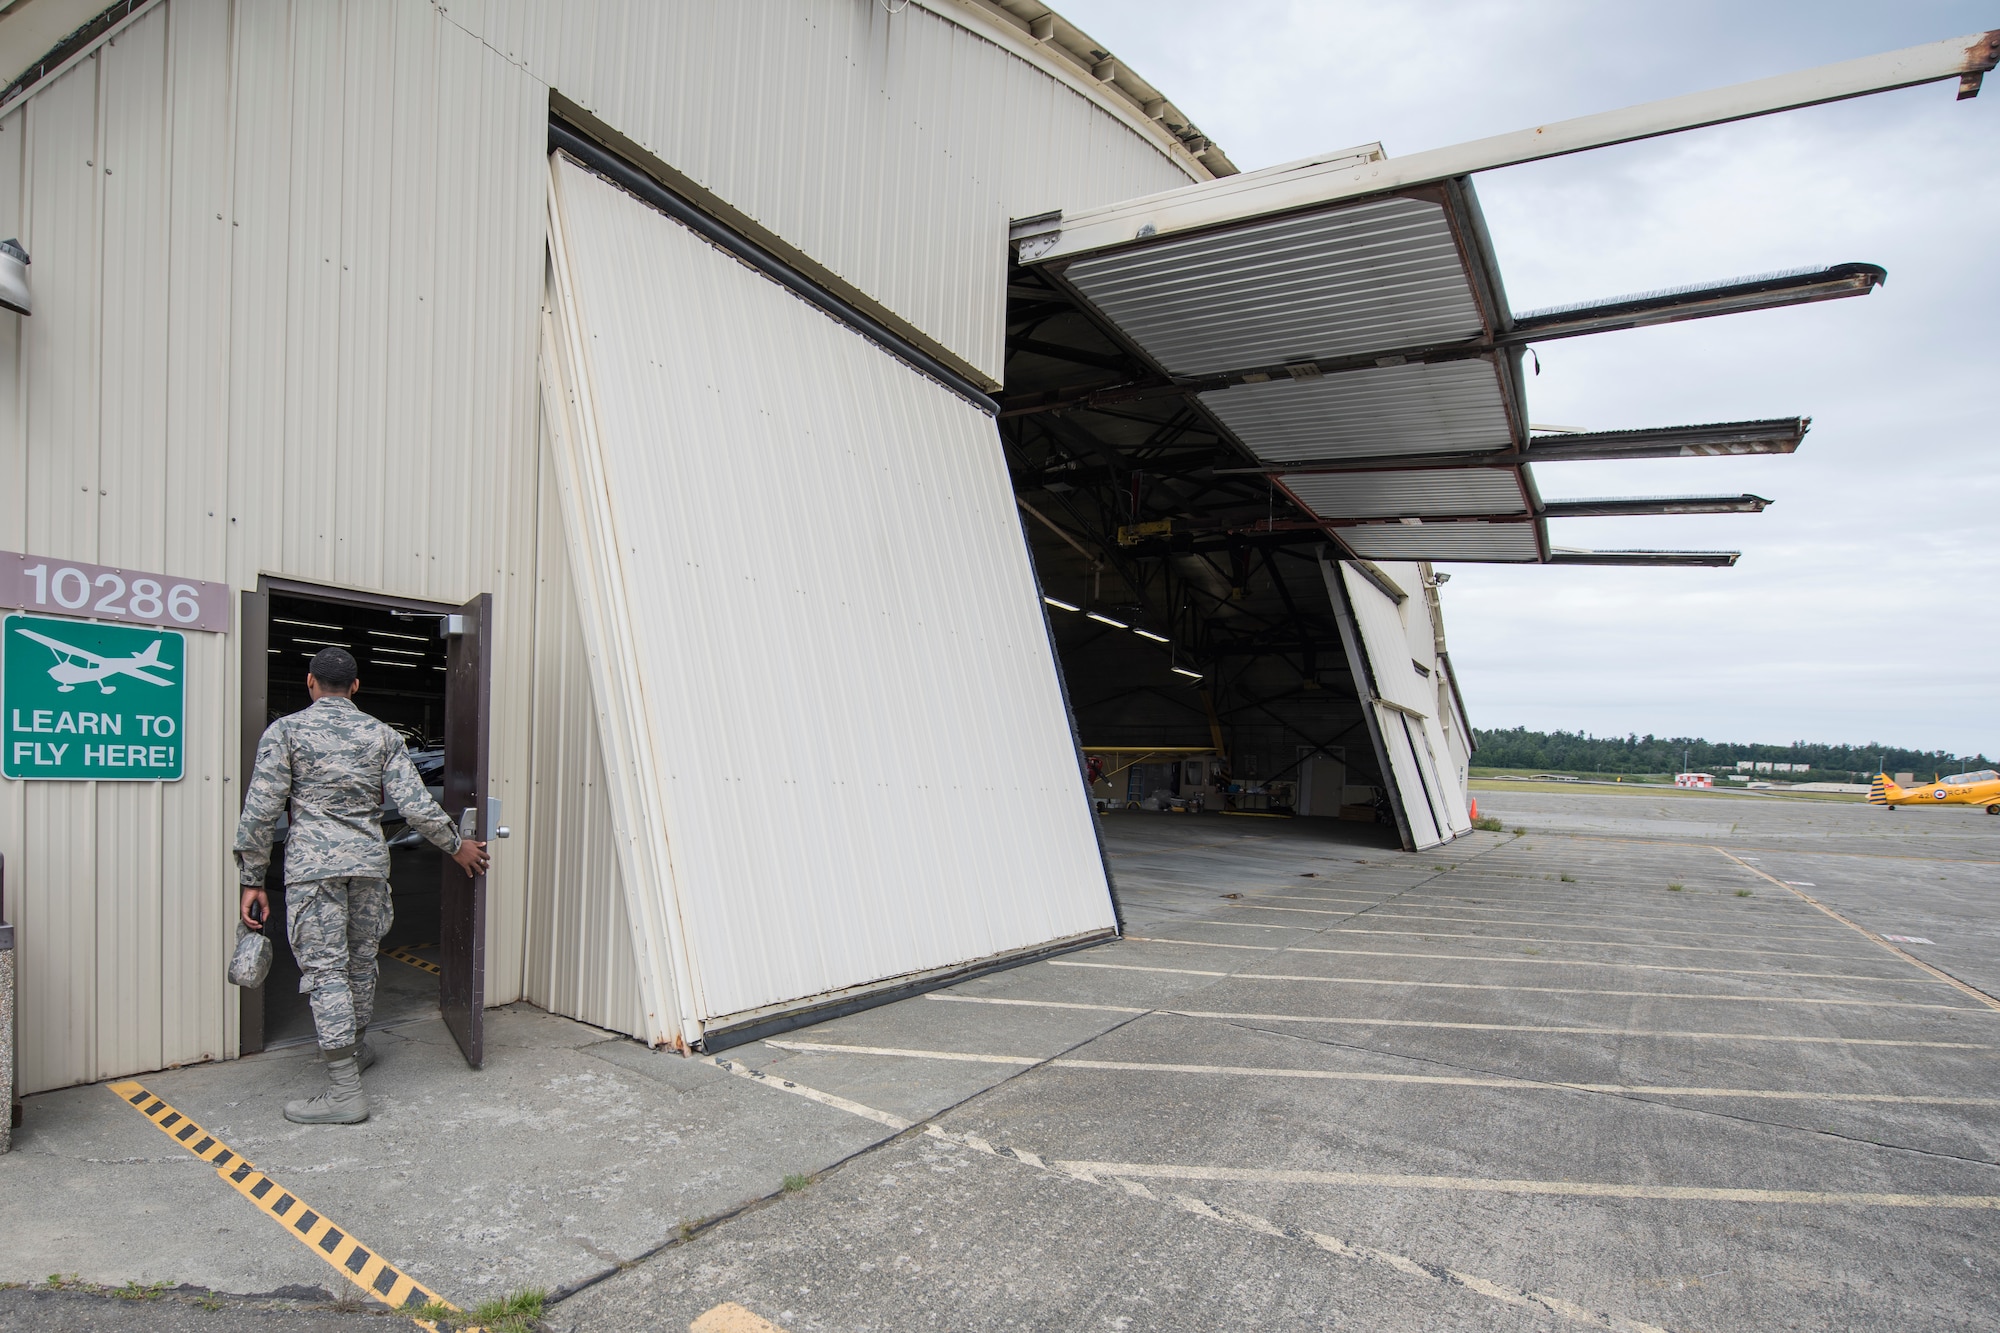 Airman 1st Class Ty Wilkerson, a 517th Airlift Squadron aviation resource manager walks through the door of the Elmendorf Aero Club hangar at Joint Base Elmendorf-Richardson, Alaska, June 28, 2018. Wilkerson is a single Airman getting more information about the introductory flight offered and checking into the flight instruction programs the club offers.